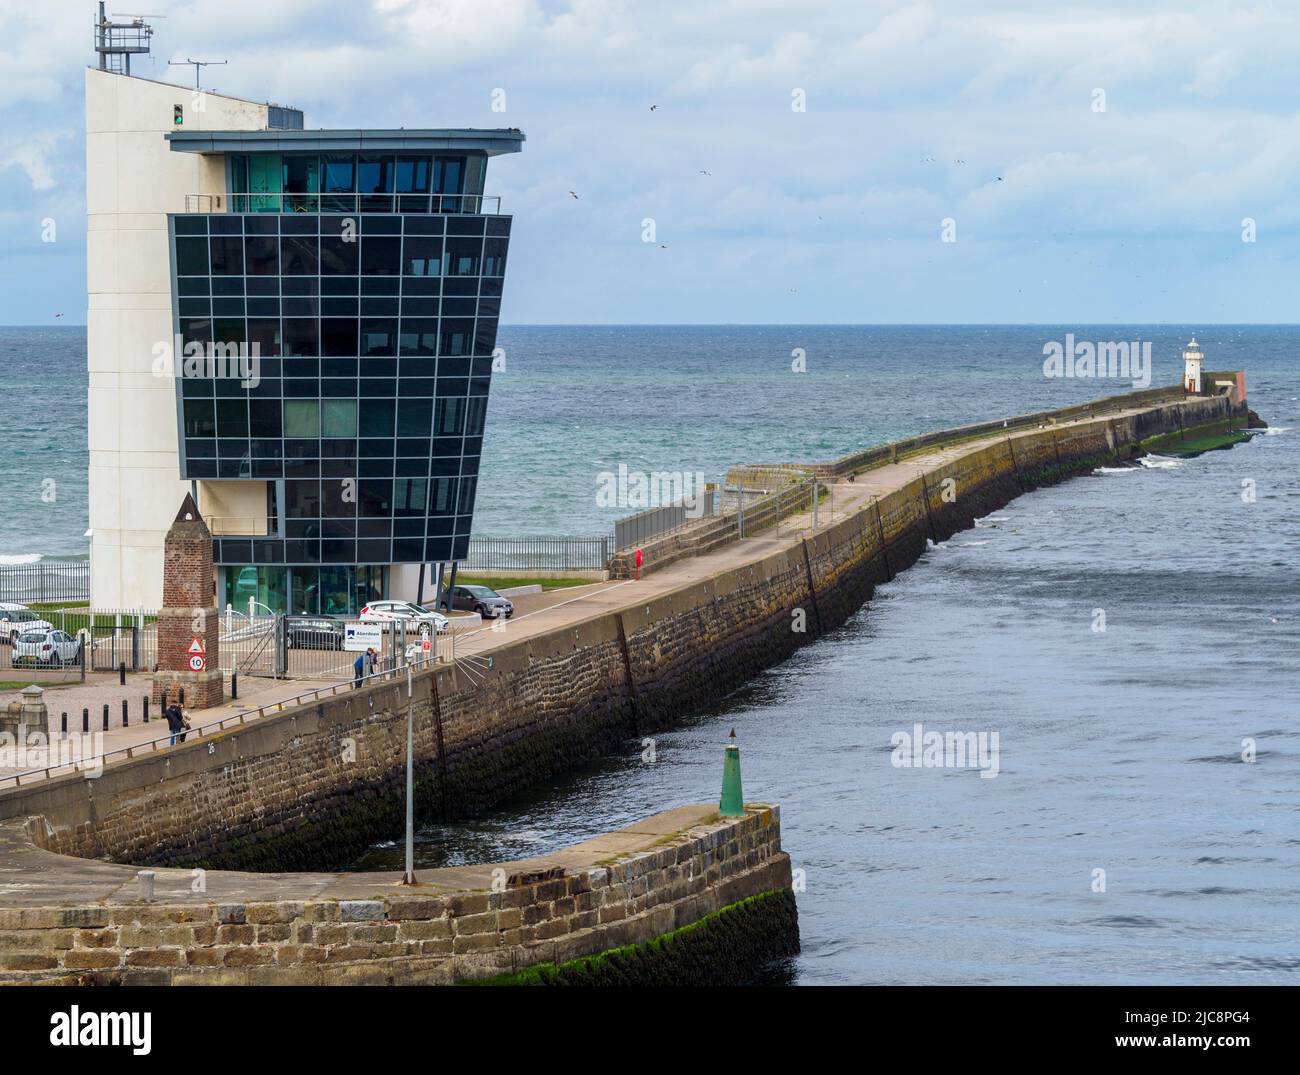 View of the Aberdeen Harbour Marine Operations Centre from the viewing deck of a ferry leaving the harbour. Stock Photo